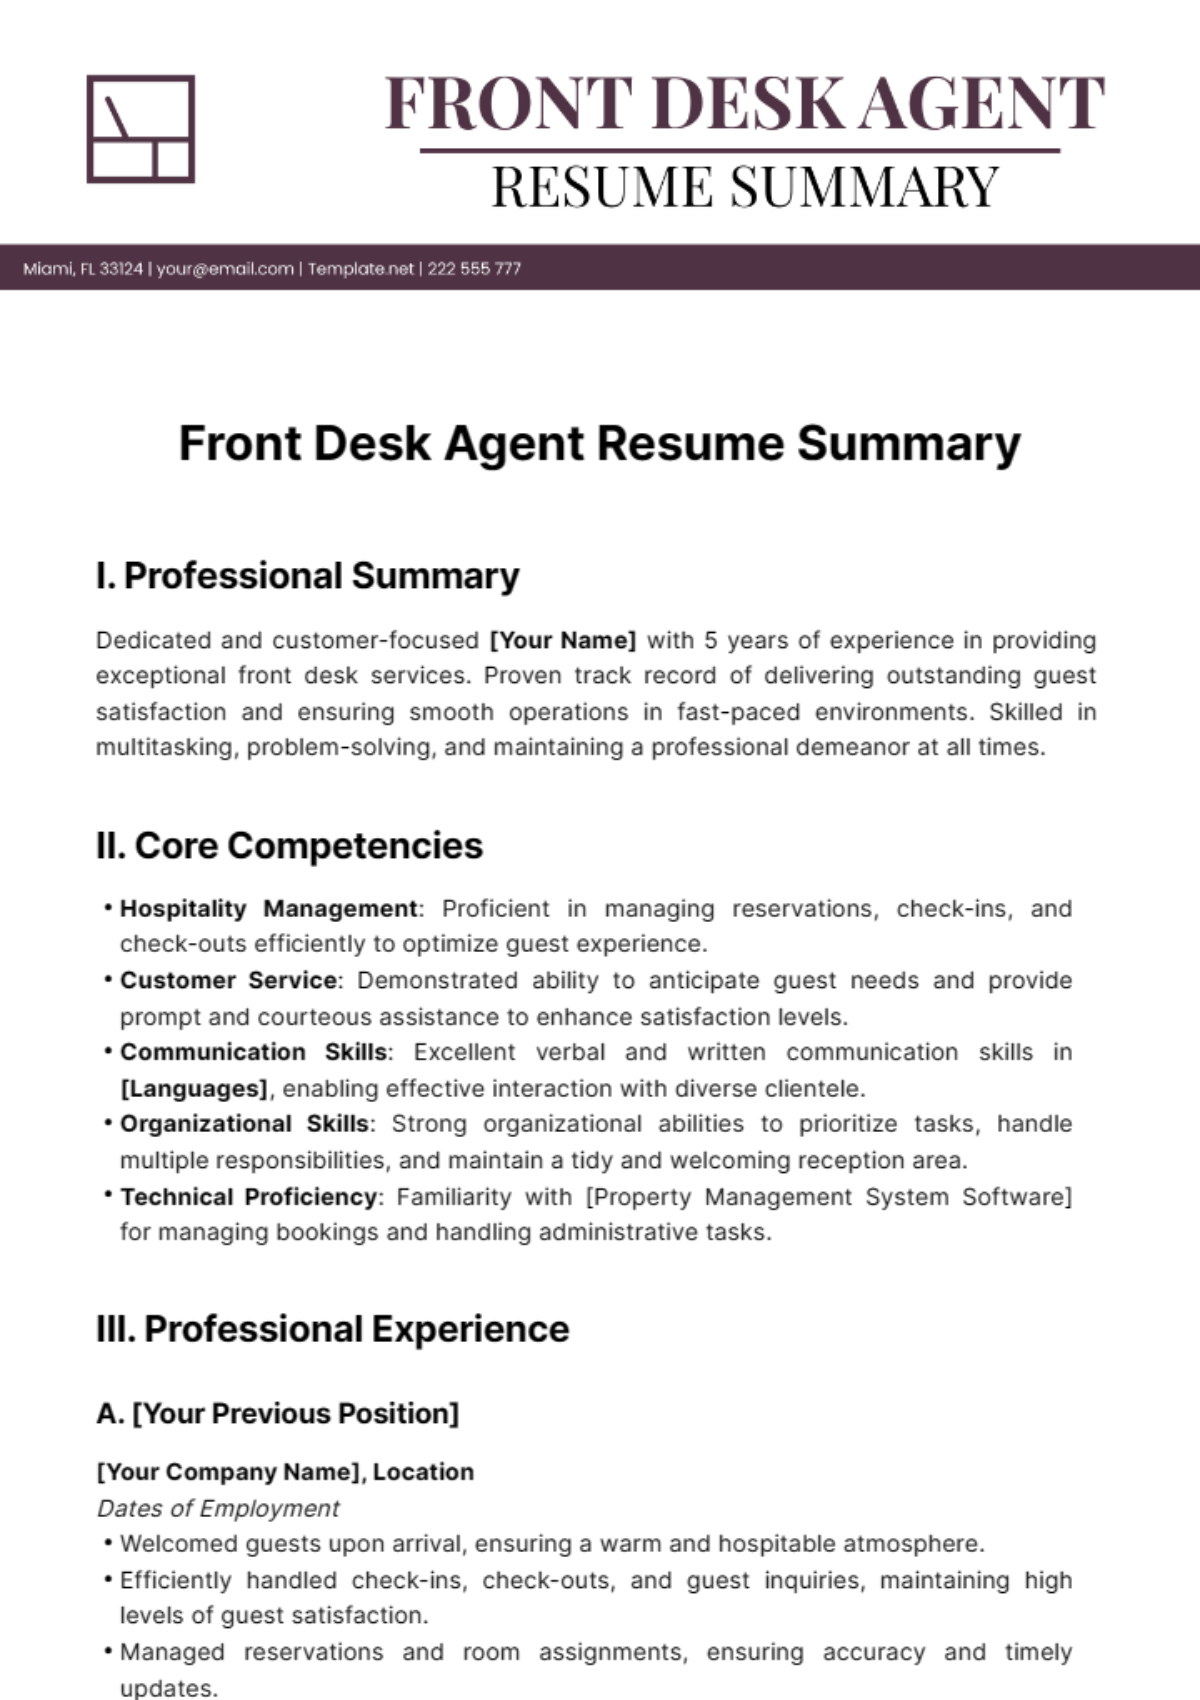 Front Desk Agent Resume Summary Template